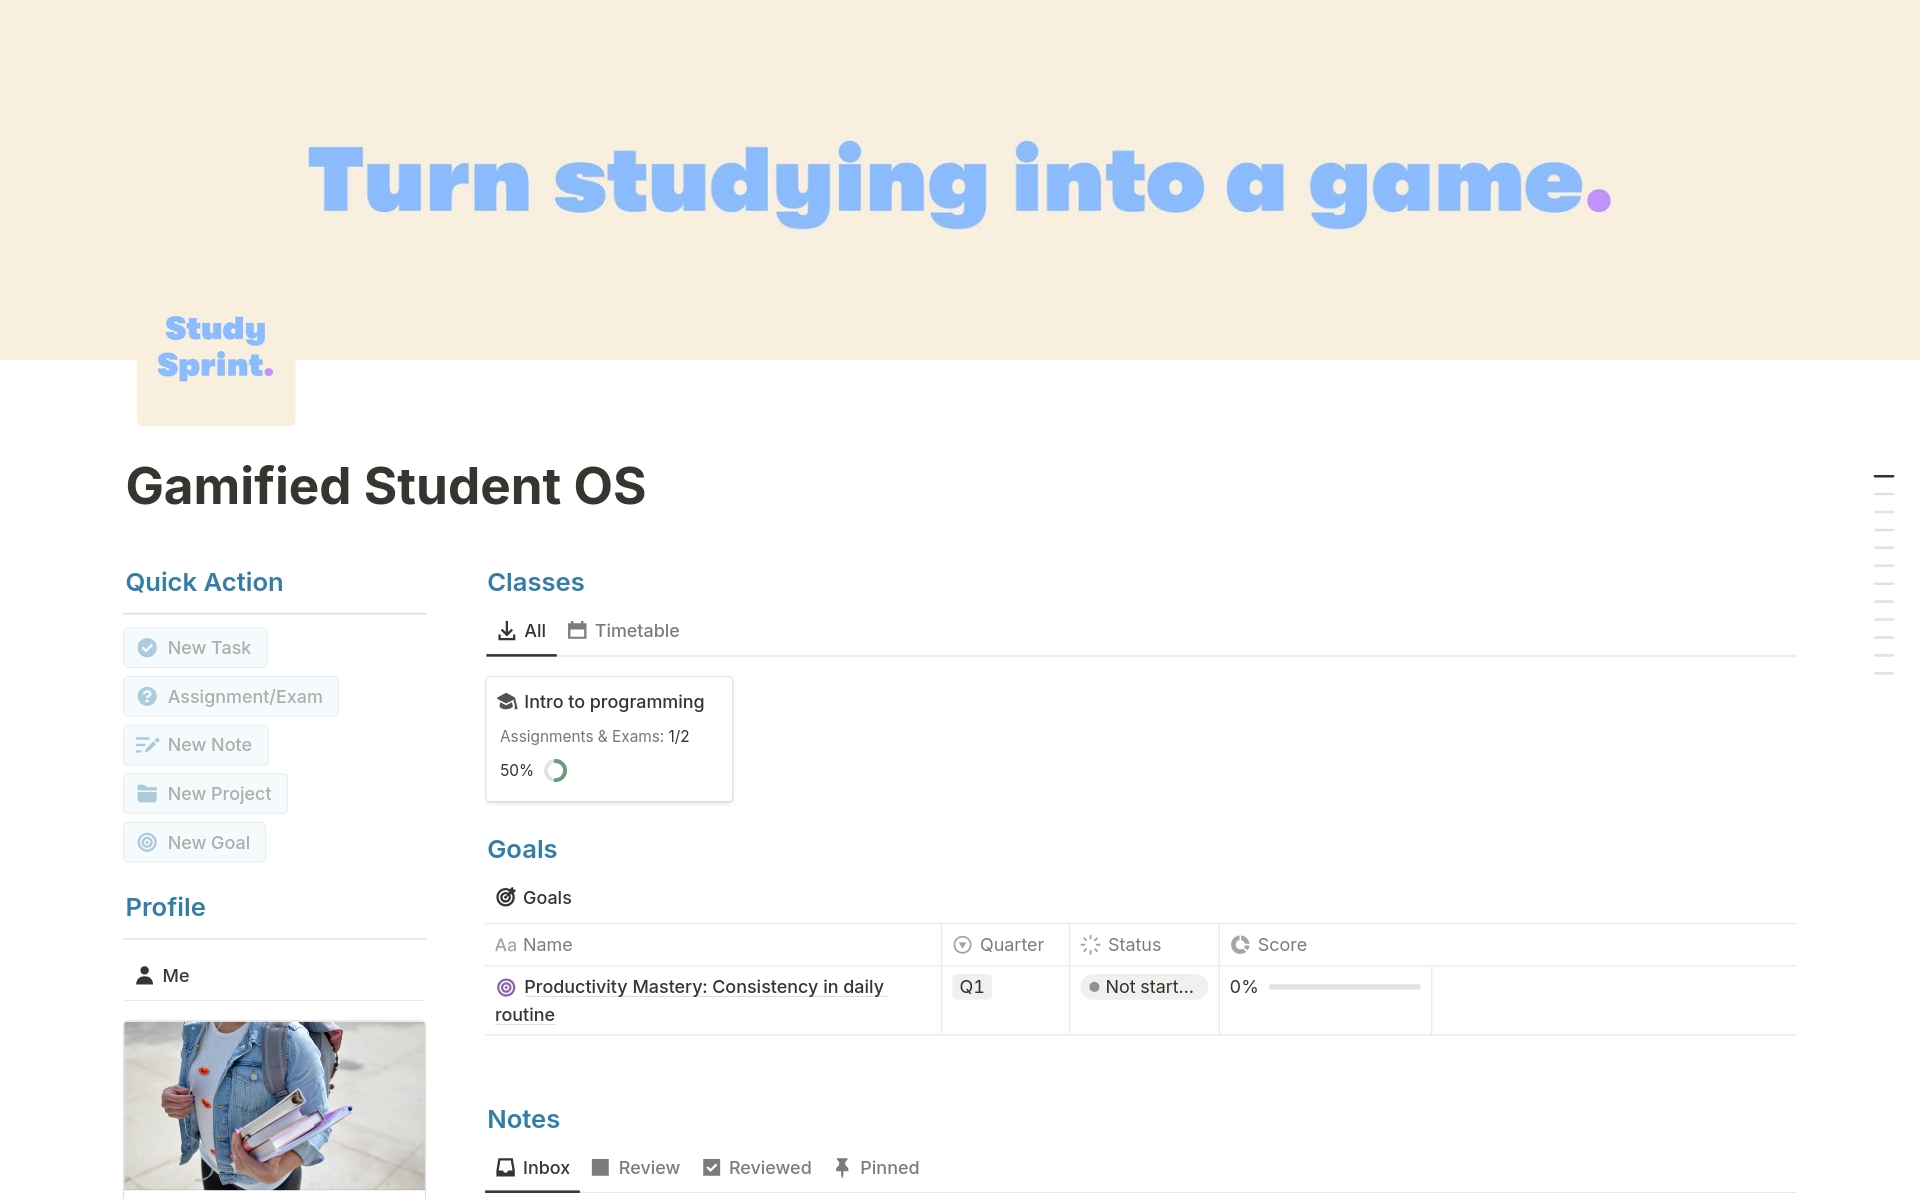 Transform your study sessions into a game with StudySprint 2.0! 🎮 Earn COINS by achieving goals, level up your character, track progress, organize notes, manage tasks, and get inspired by daily quotes. Boost productivity and make learning fun! Try StudySprint 2.0 today! 🚀📚✨